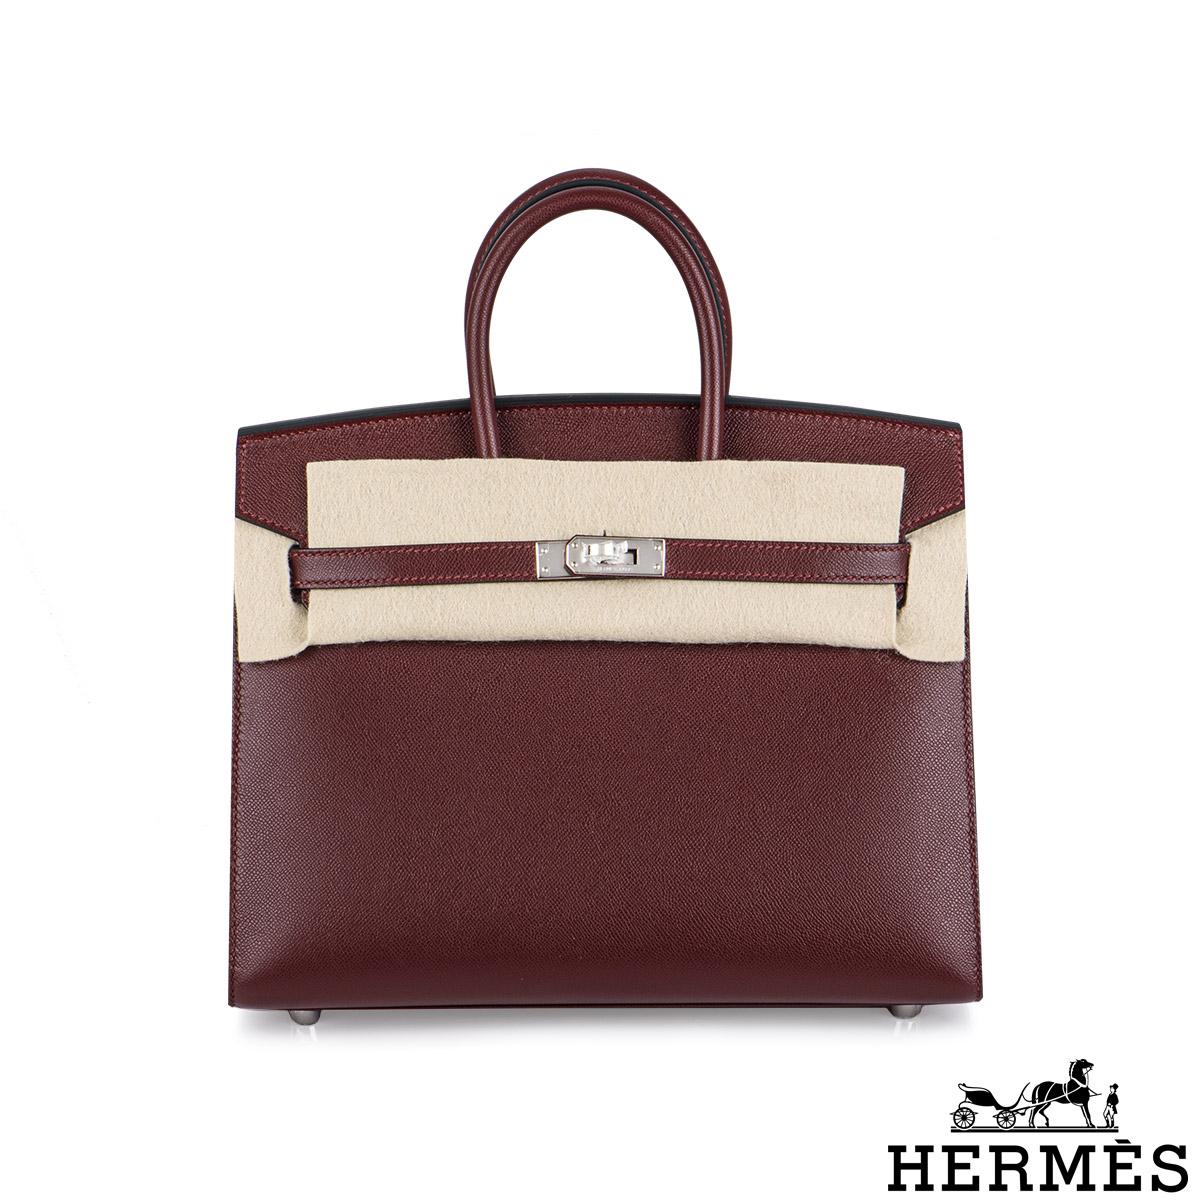 A gorgeous Hermès Birkin Sellier 25cm Rouge H bag. The exterior of this Birkin is in Rouge H Veau leather with tonal stitching. It features palladium hardware with two straps and front toggle closure. The interior is lined with Rouge H Veau leather